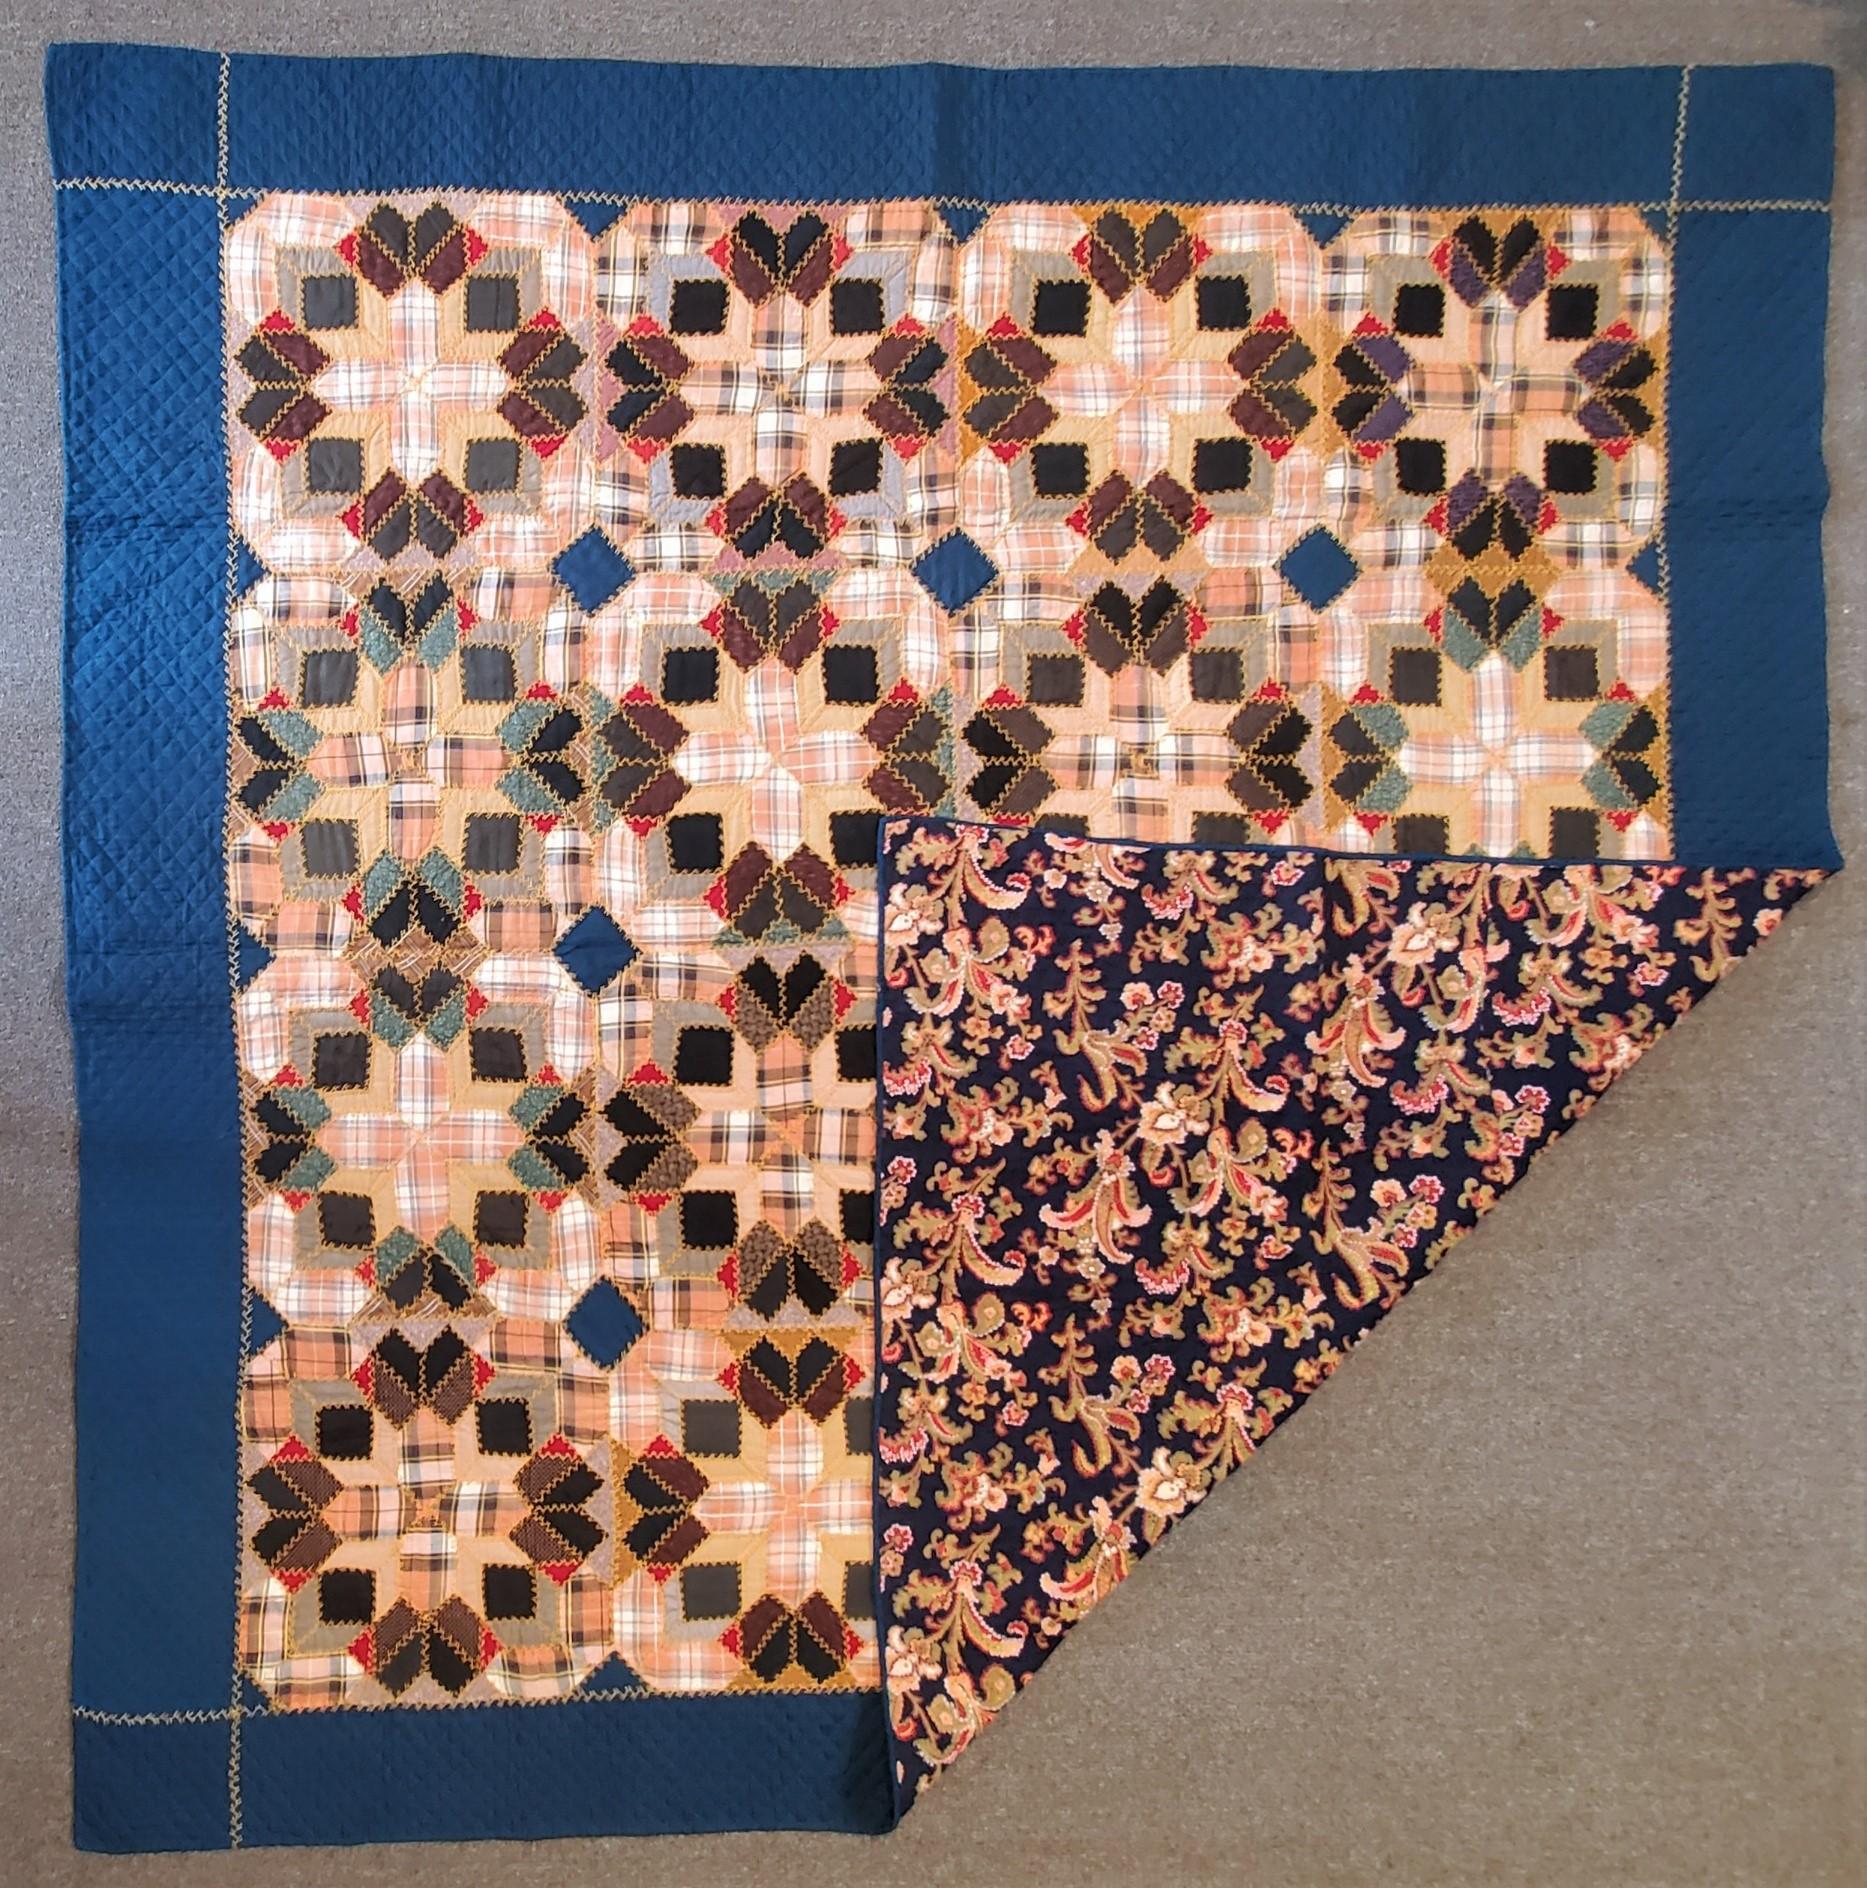 This super amazing wool plaid pieced stars is in mint condition. The surround stars have embroidery around the blocks. The backing is a floral wool backing.The border is a teal blue wool and very nicely quilted. This quilt is from a private